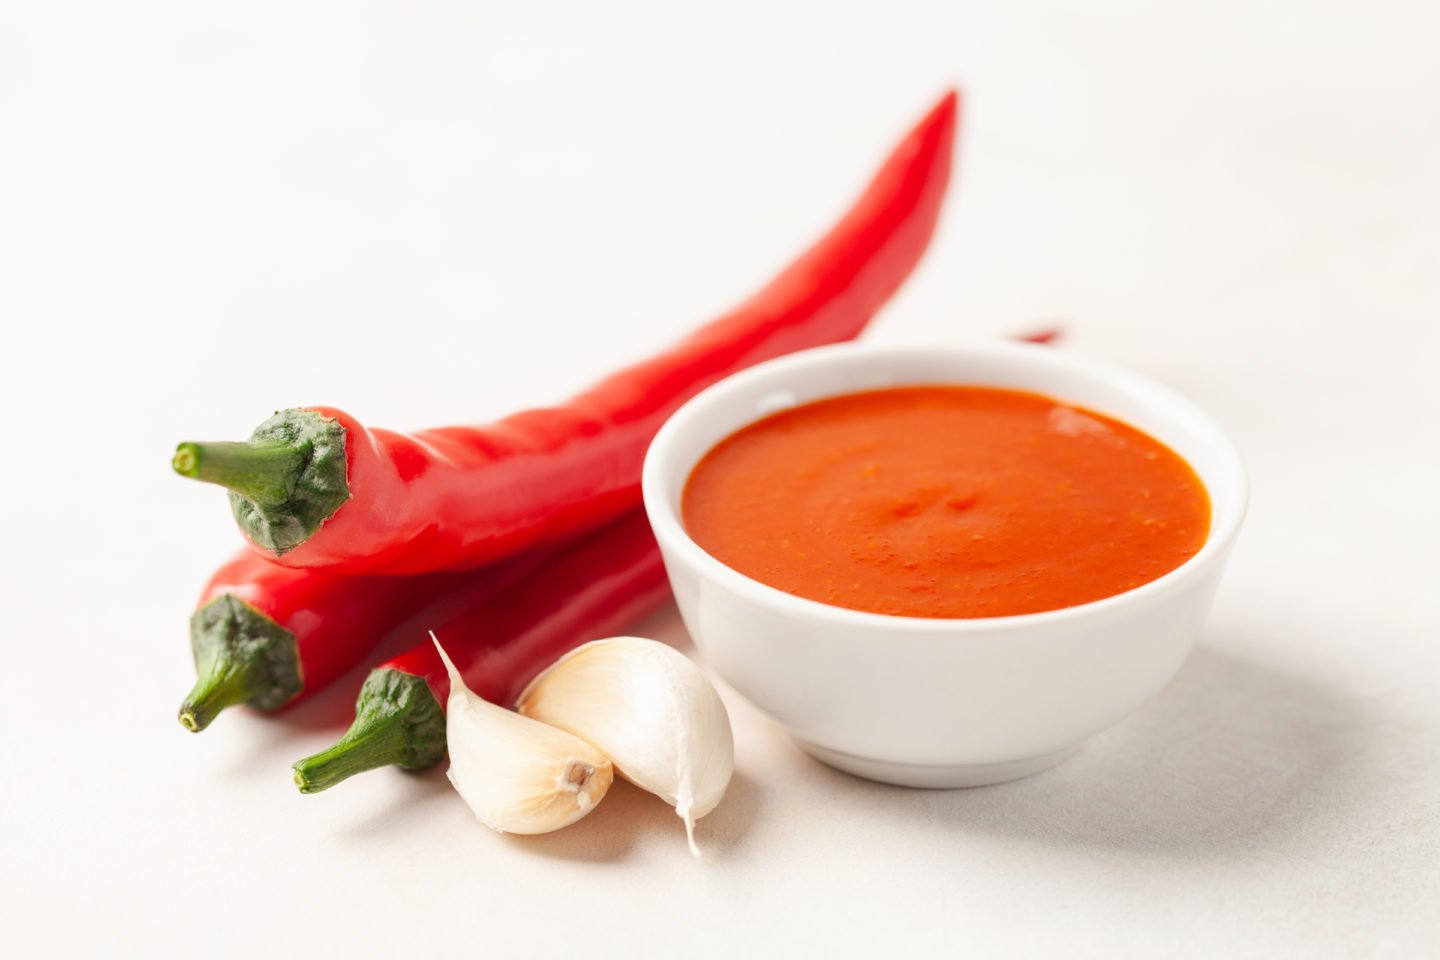 sriracha sauce as red curry paste substitute